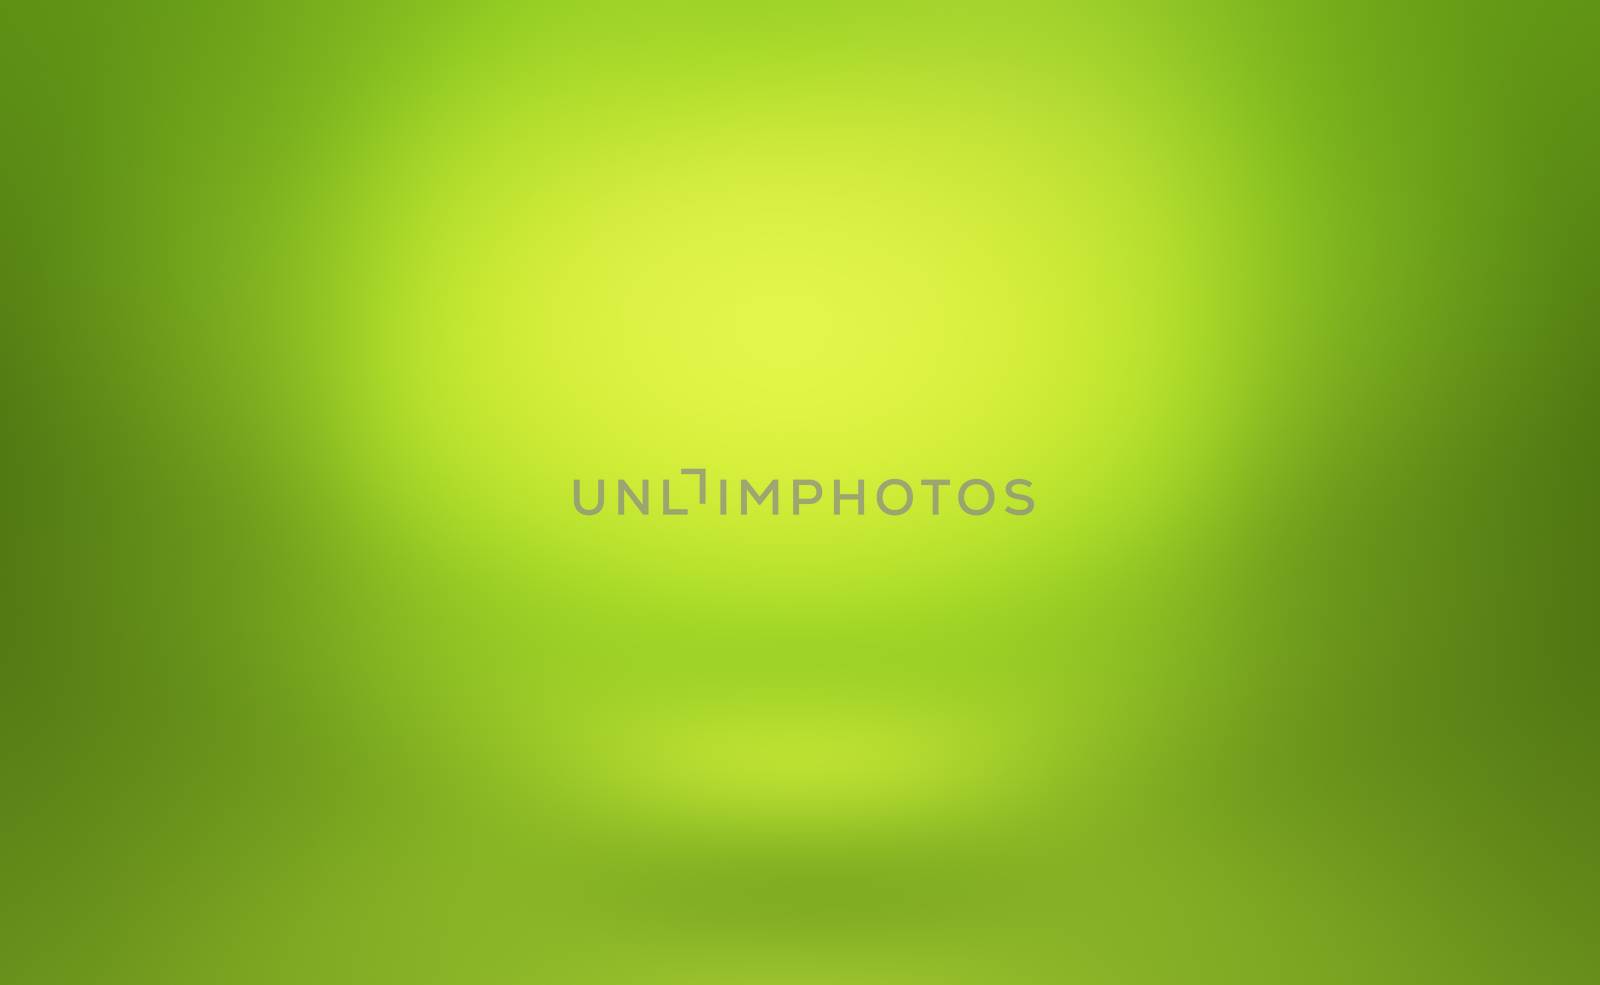 Green gradient abstract background empty room with space for your text and picture